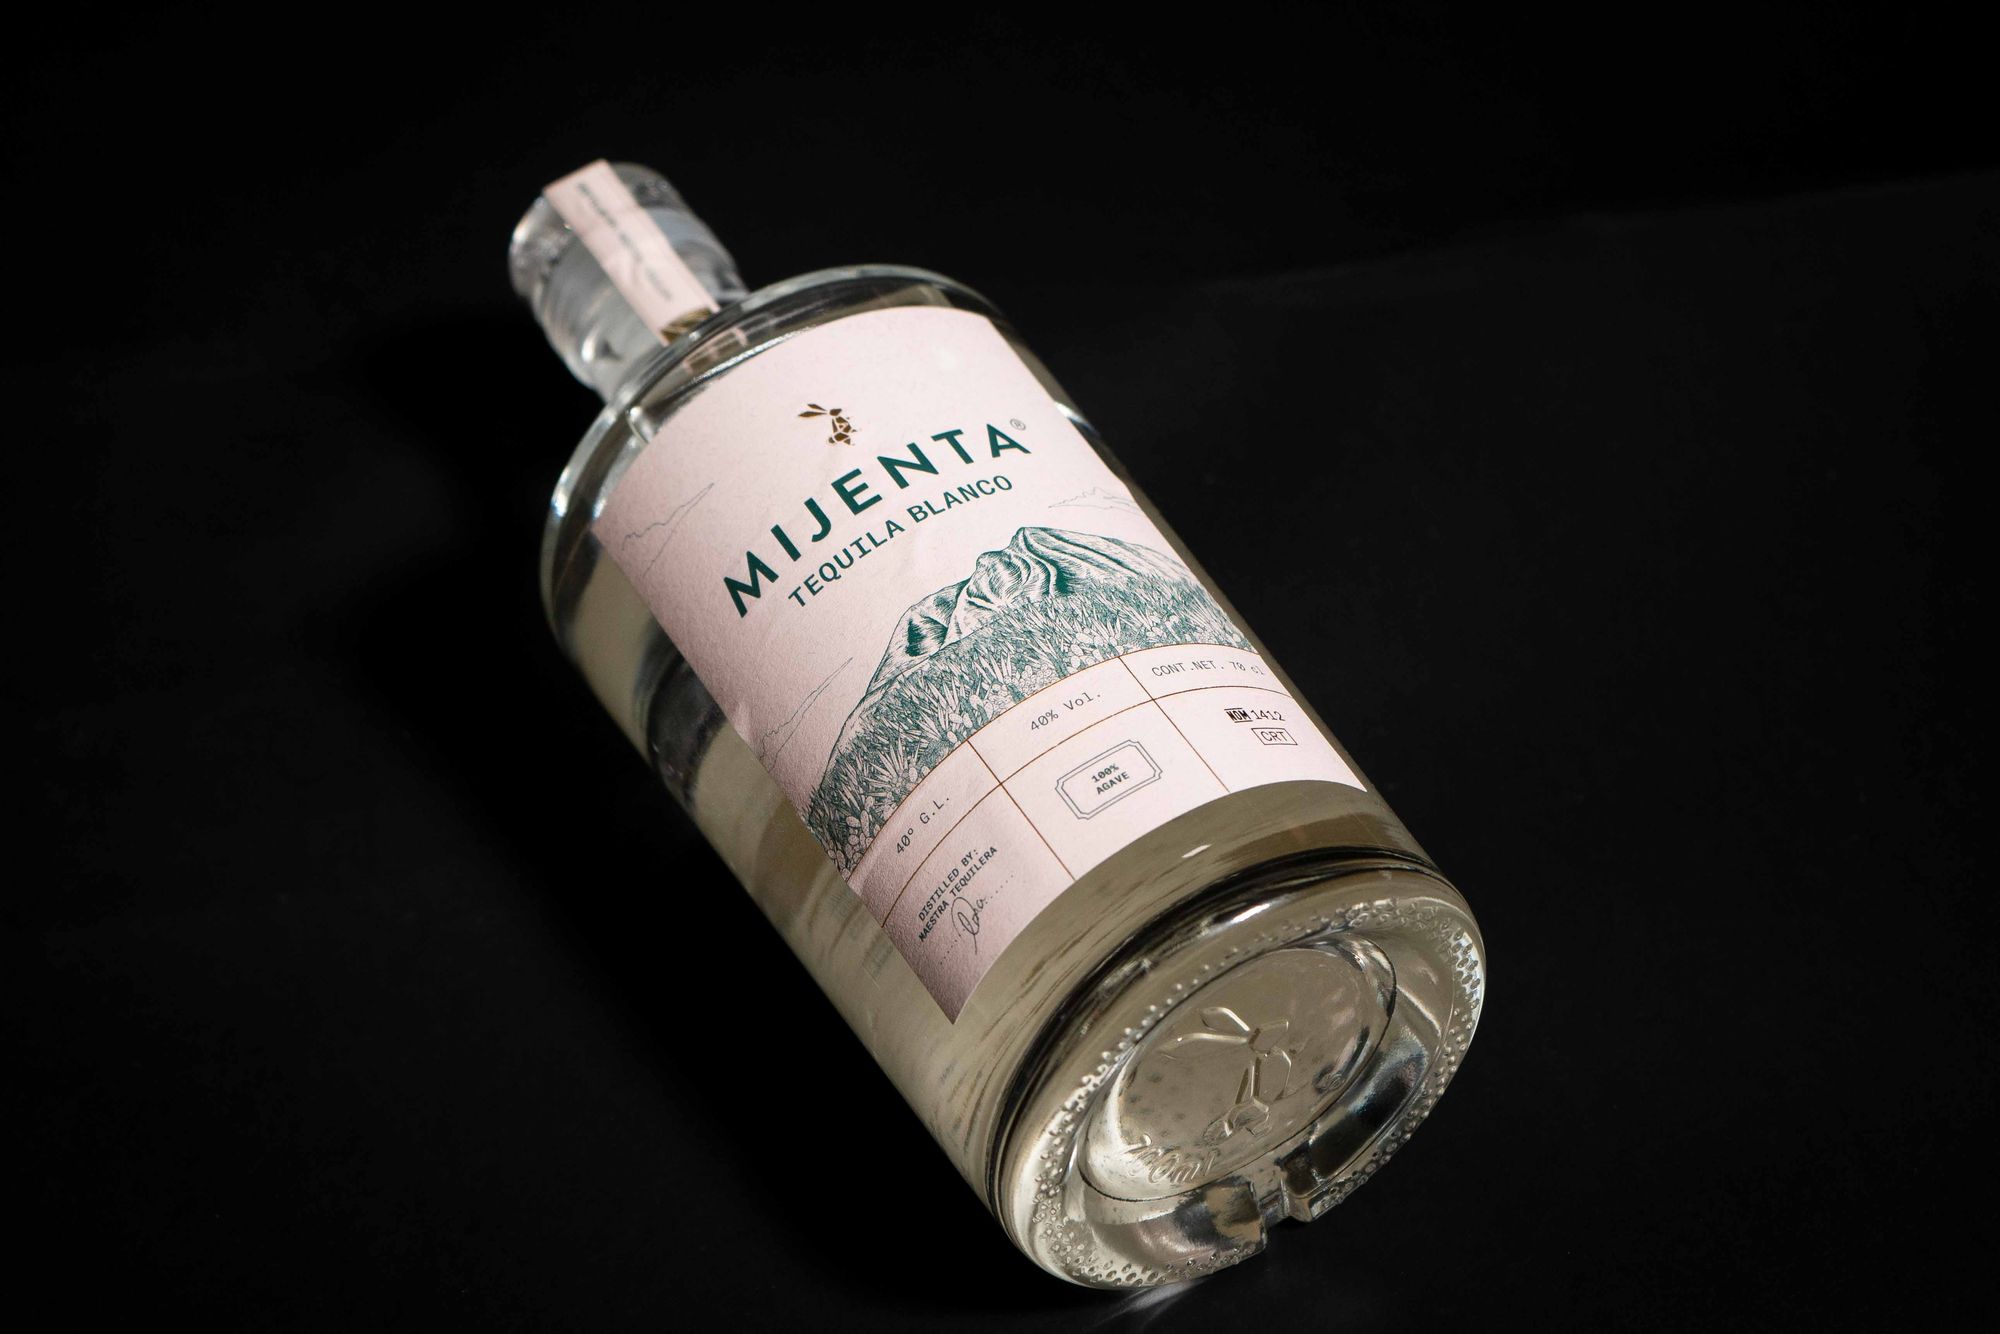 Mijenta Tequila Blanco lands at 40 percent ABV. Photo: Boothby